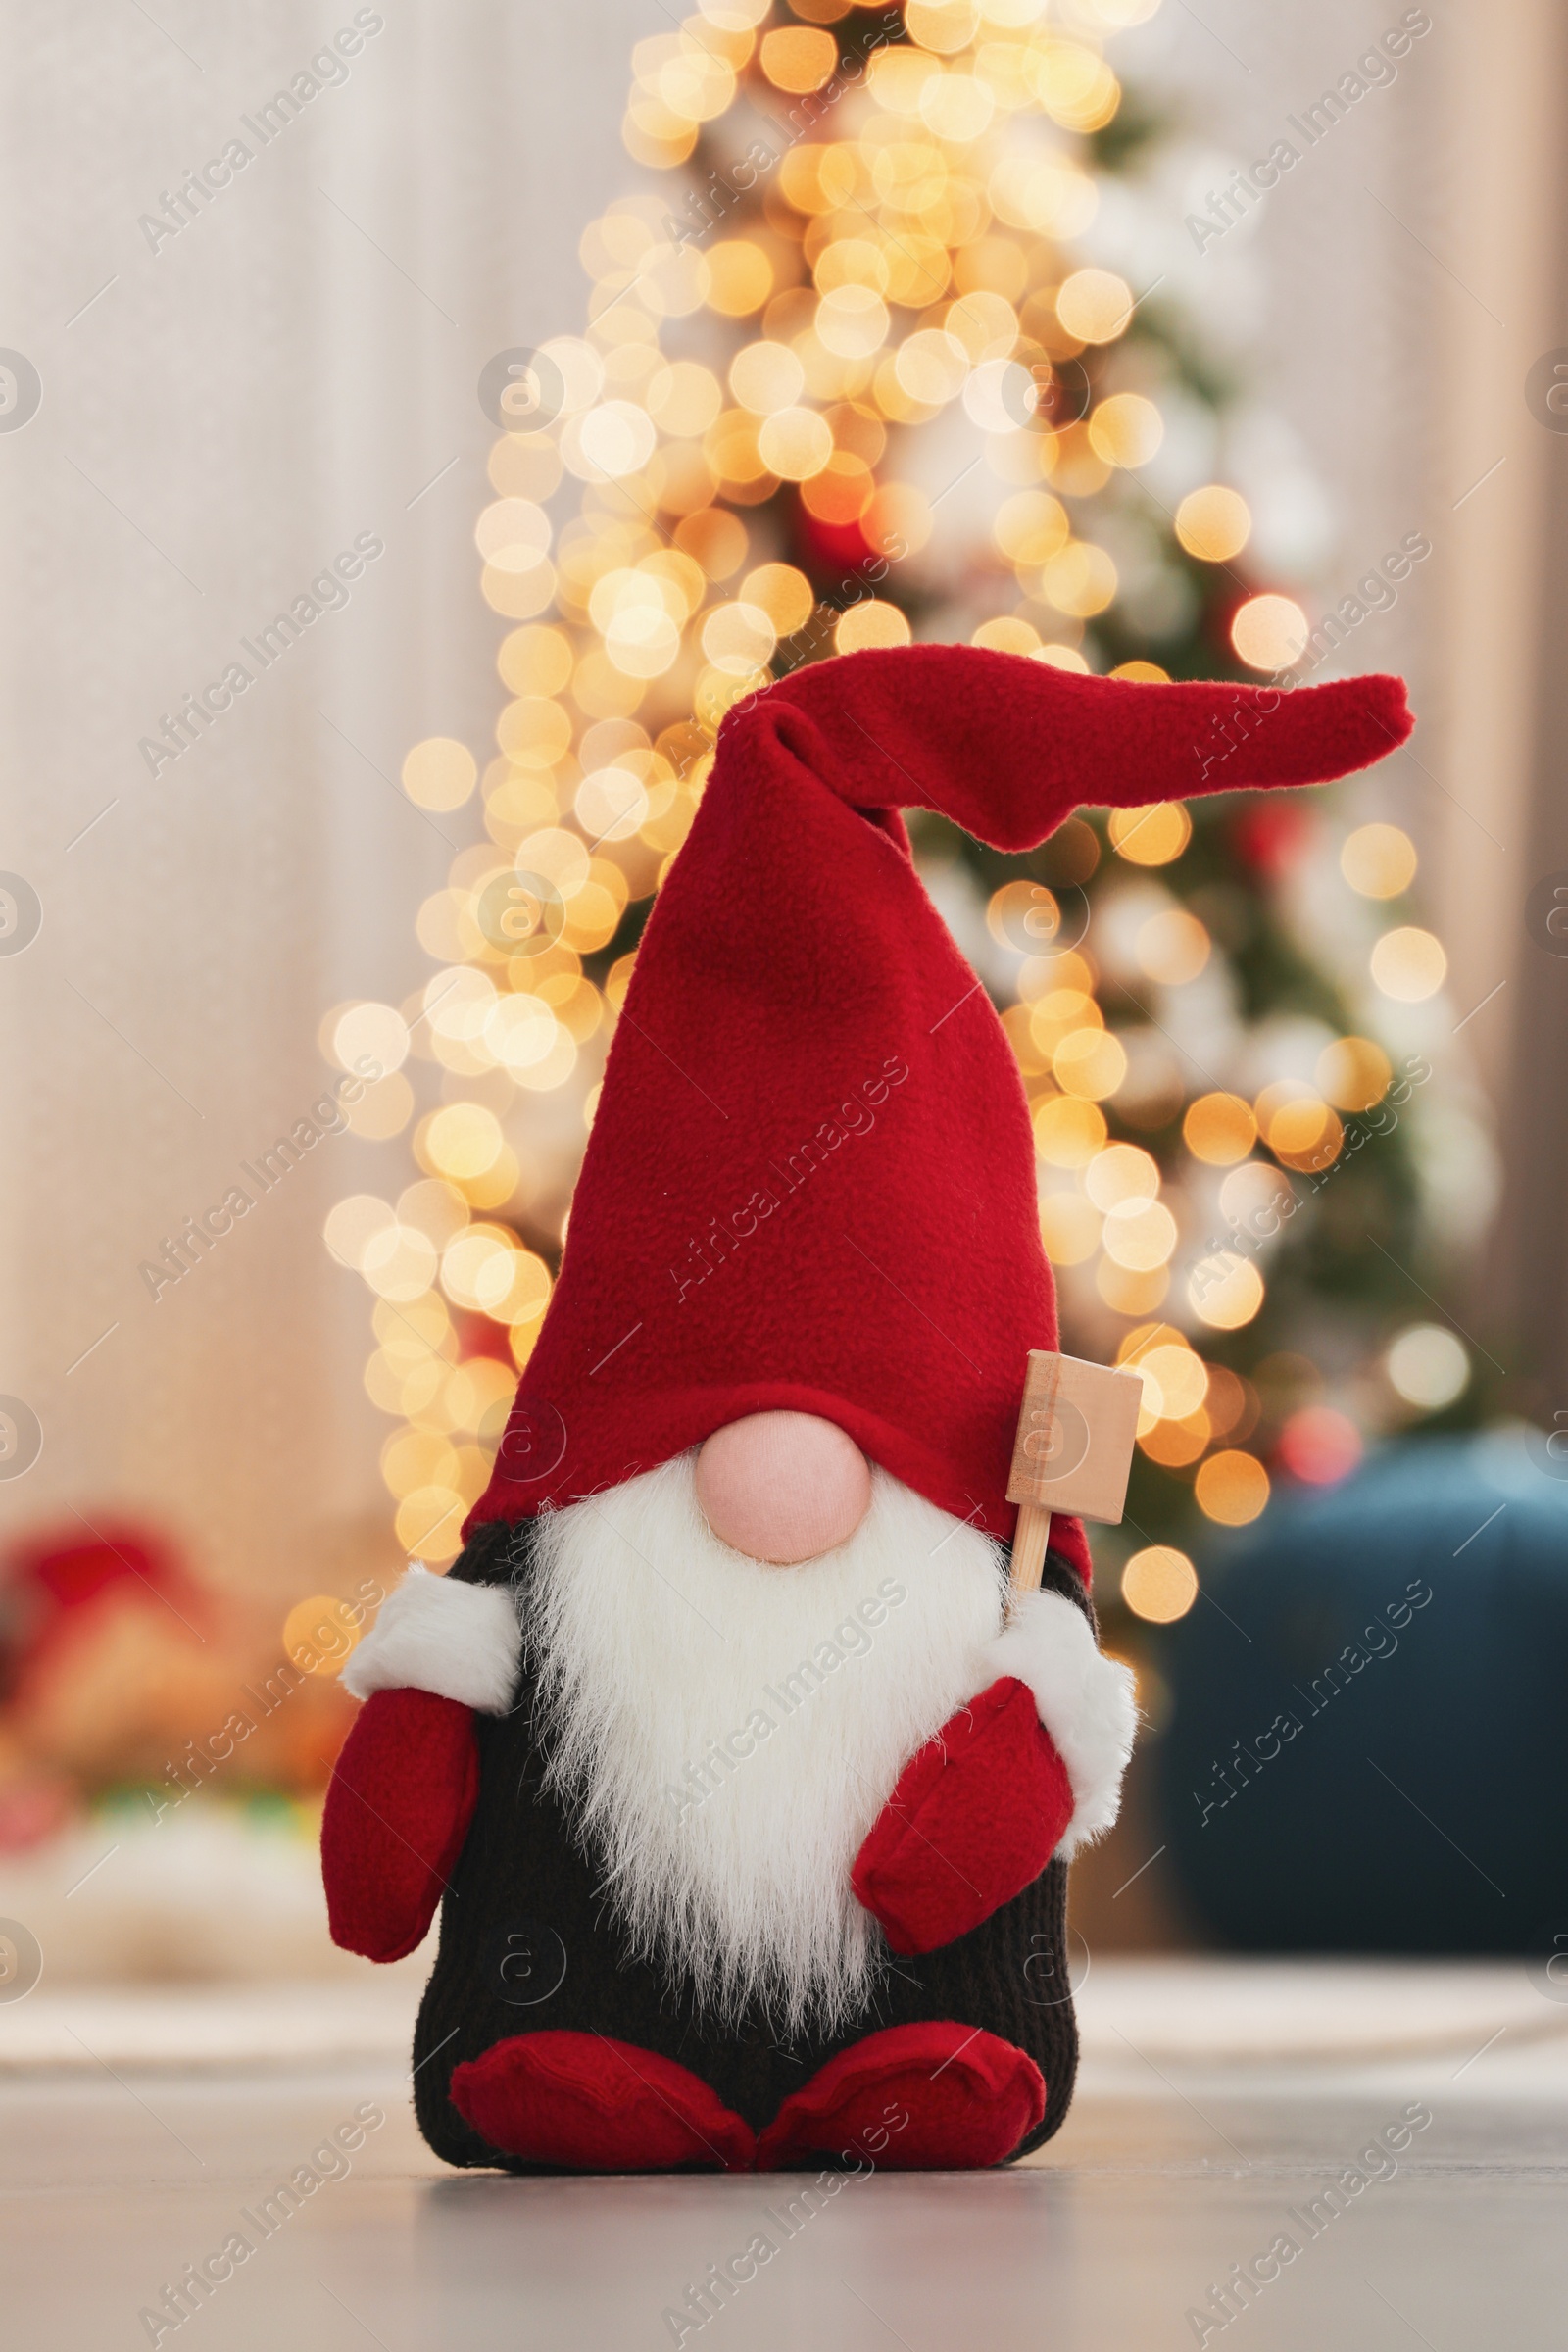 Photo of Cute Christmas gnome on floor in decorated room